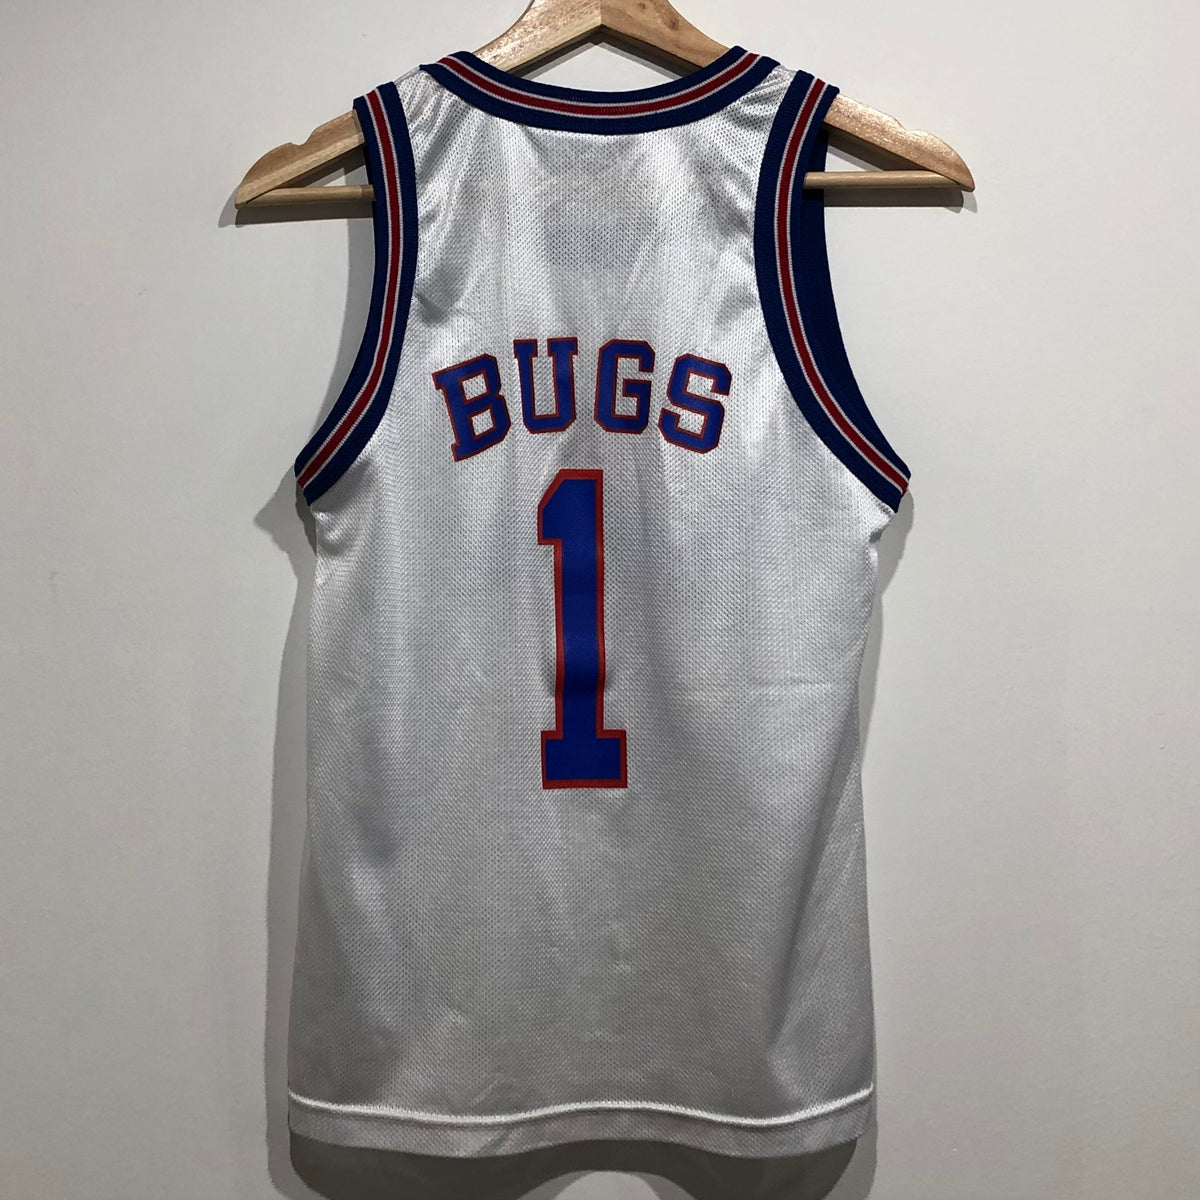 White Tune Squad Bugs Bunny Jersey, Size L